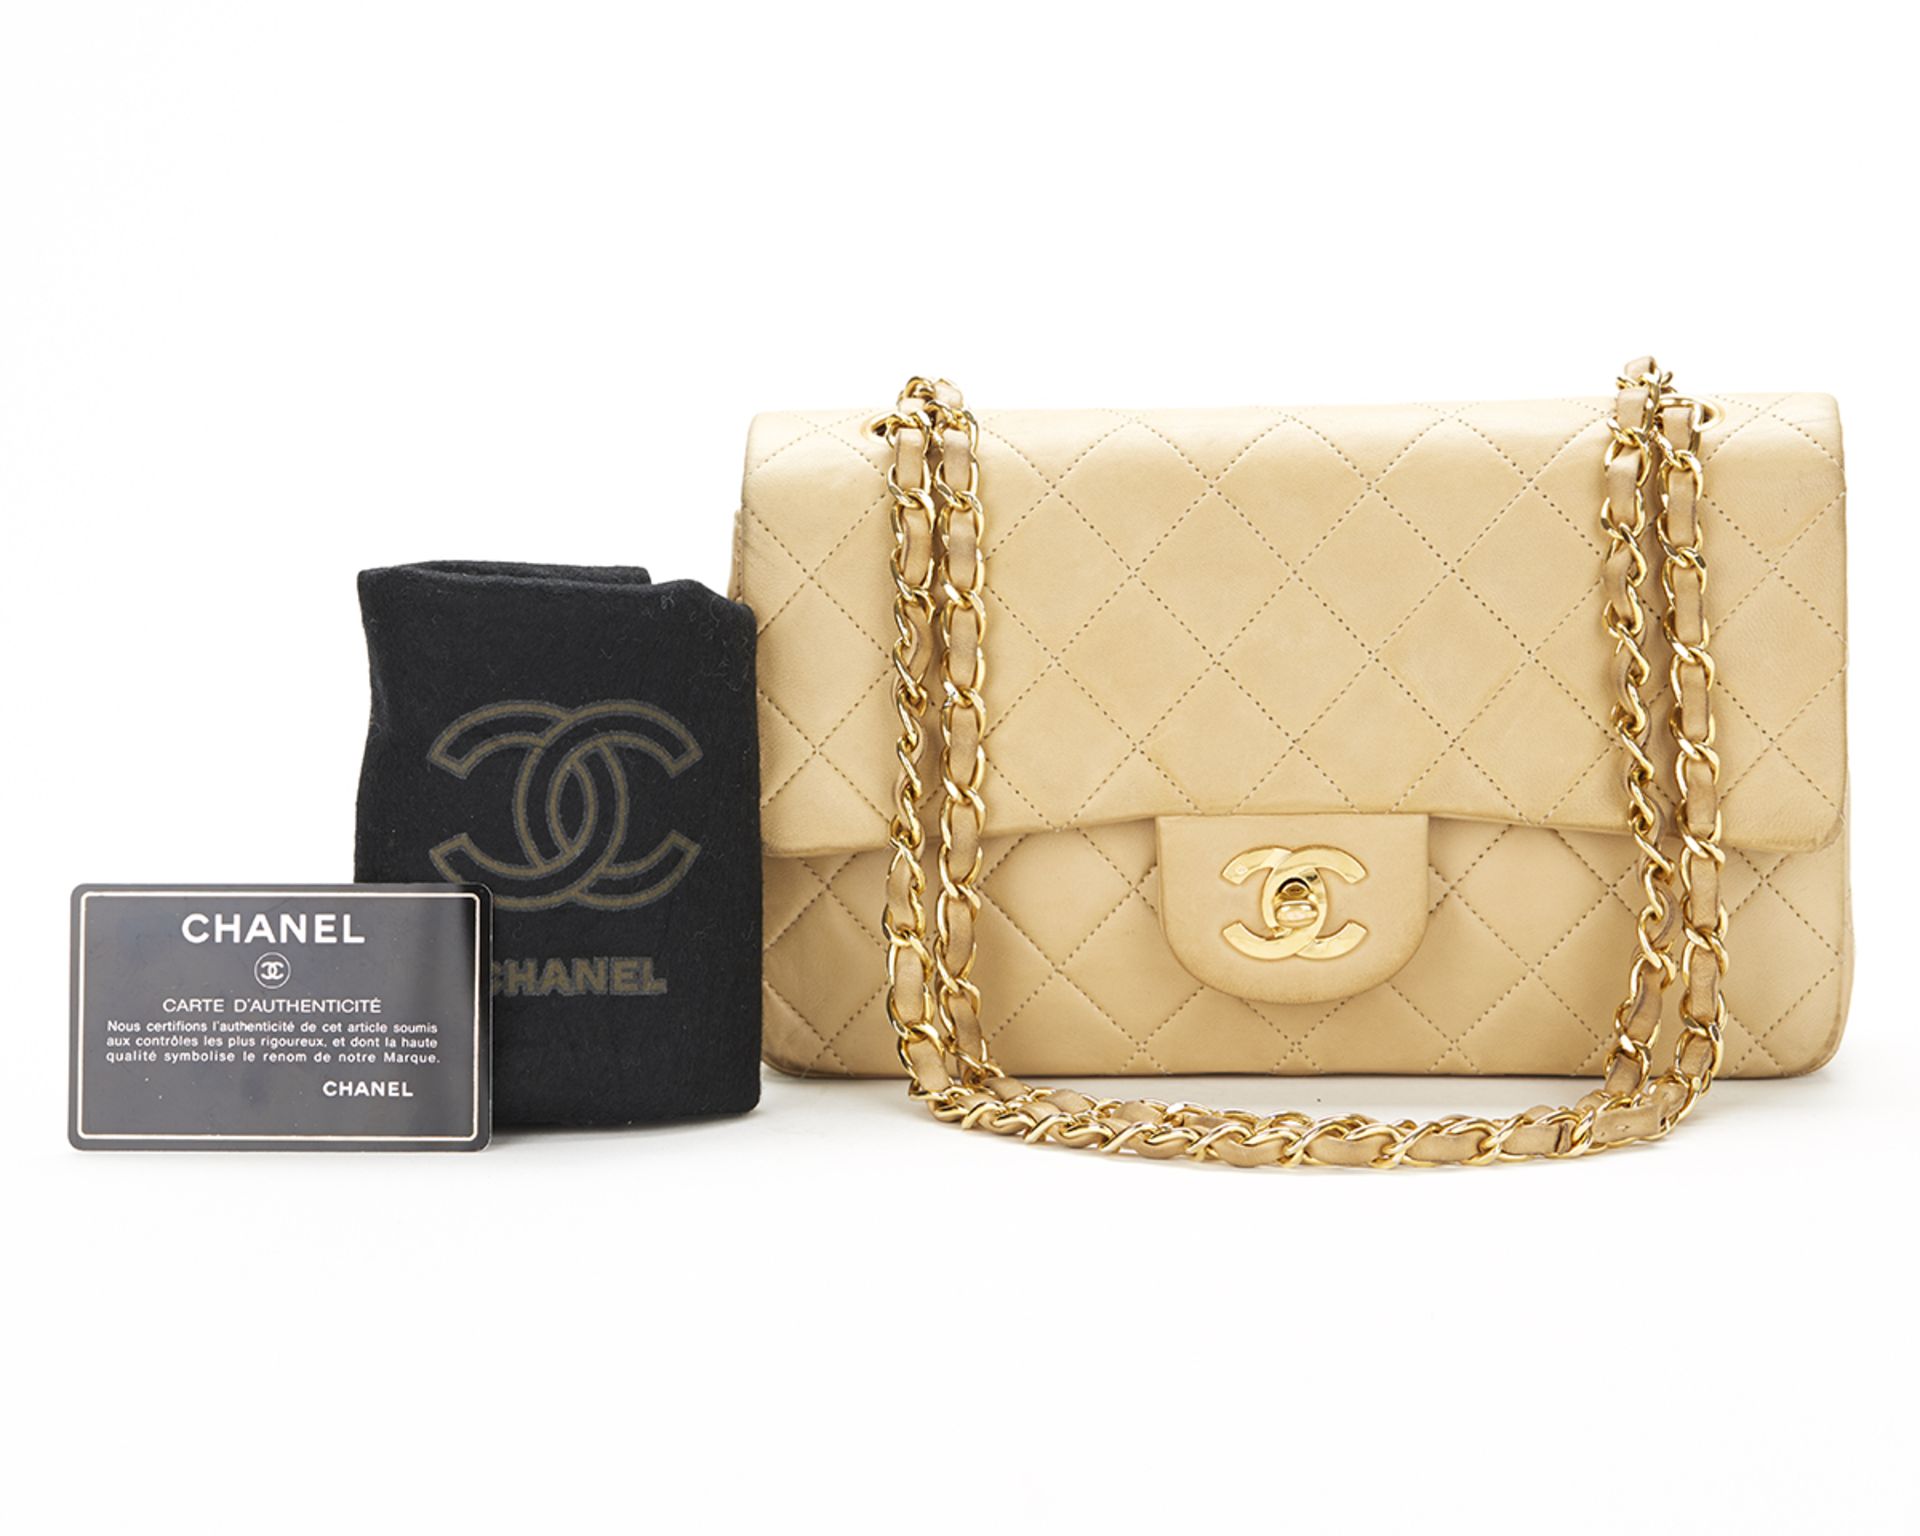 HB028 Chanel - Small Classic Double Flap Bag - Image 9 of 9